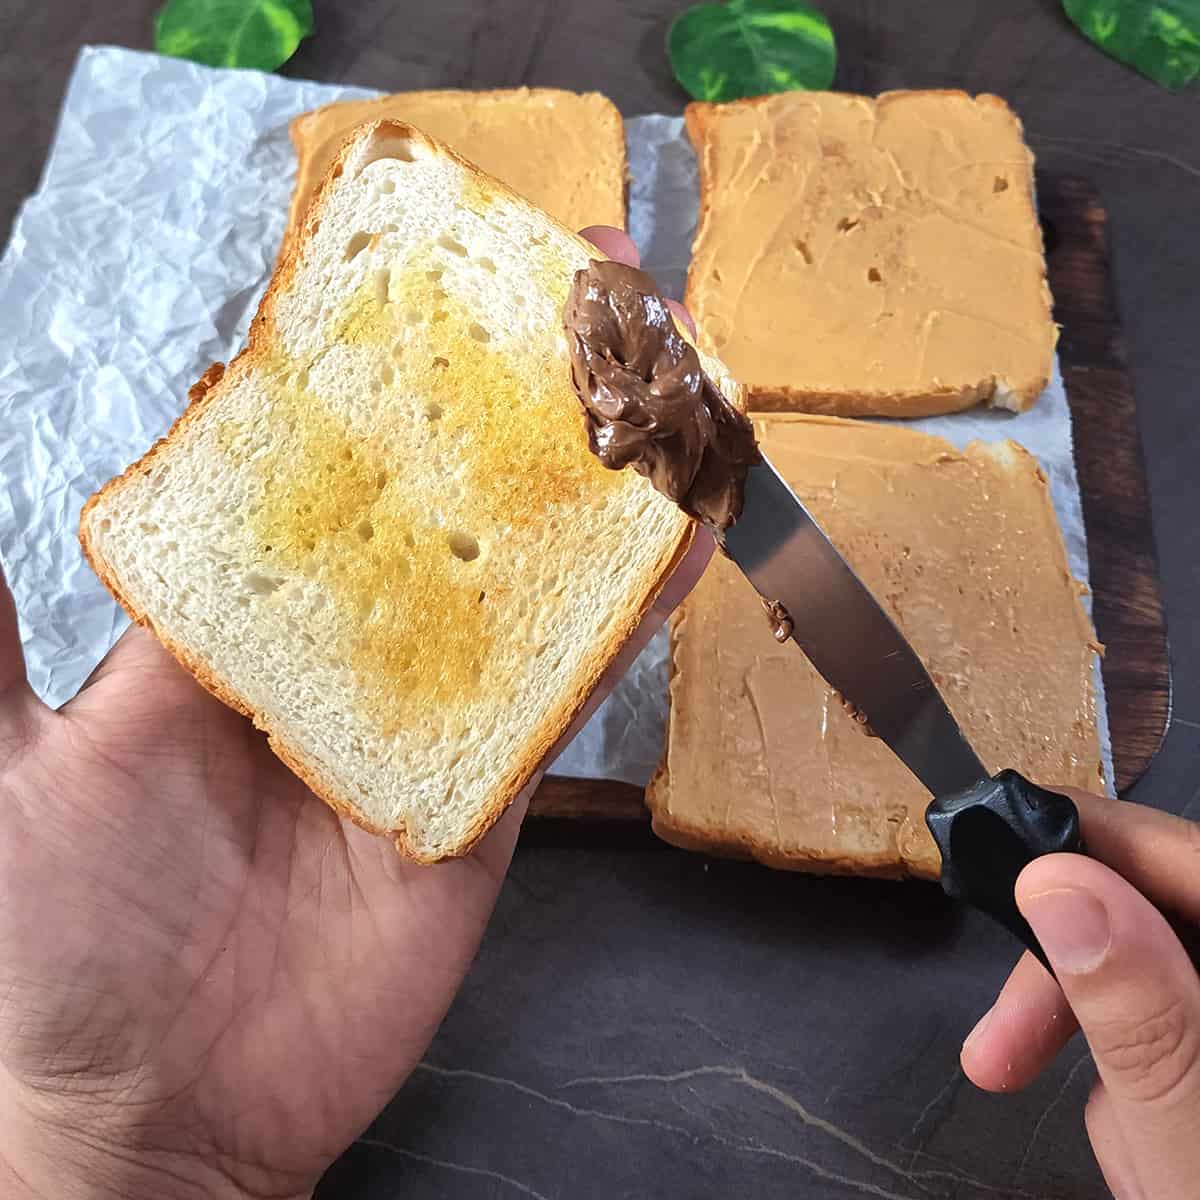 Spread nutella on top of toasted bread using a butter knife.